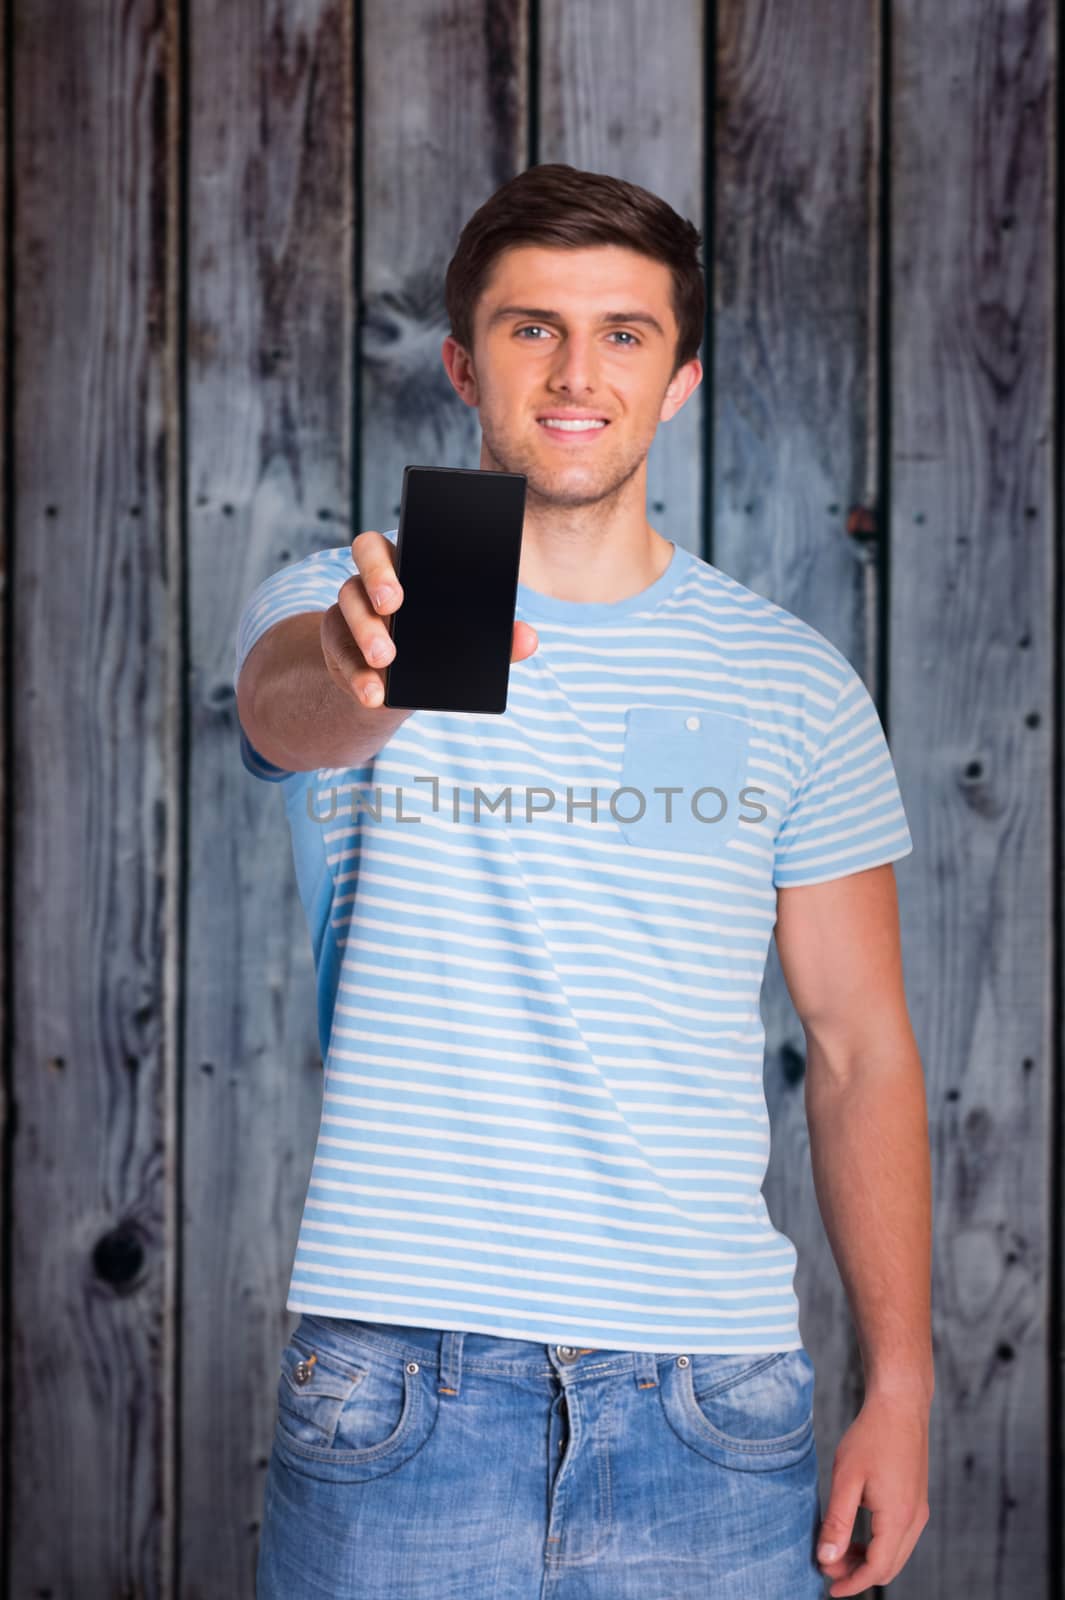 Young man showing phone to camera against grey wooden planks